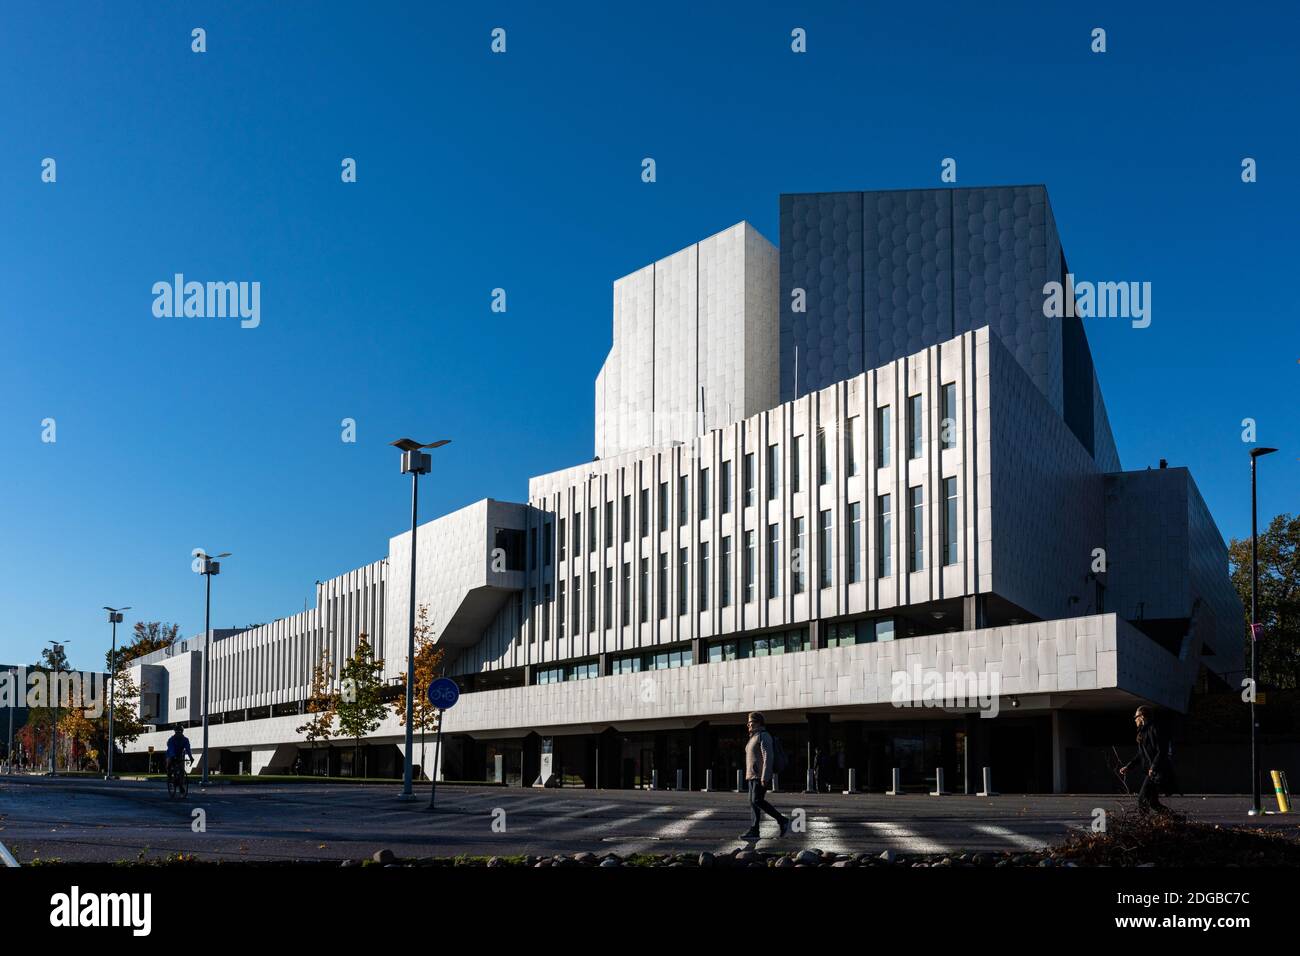 Event and congress venue Finland Hall - designed by architect Alvar Aalto - in Töölö district of Helsinki, Finland Stock Photo